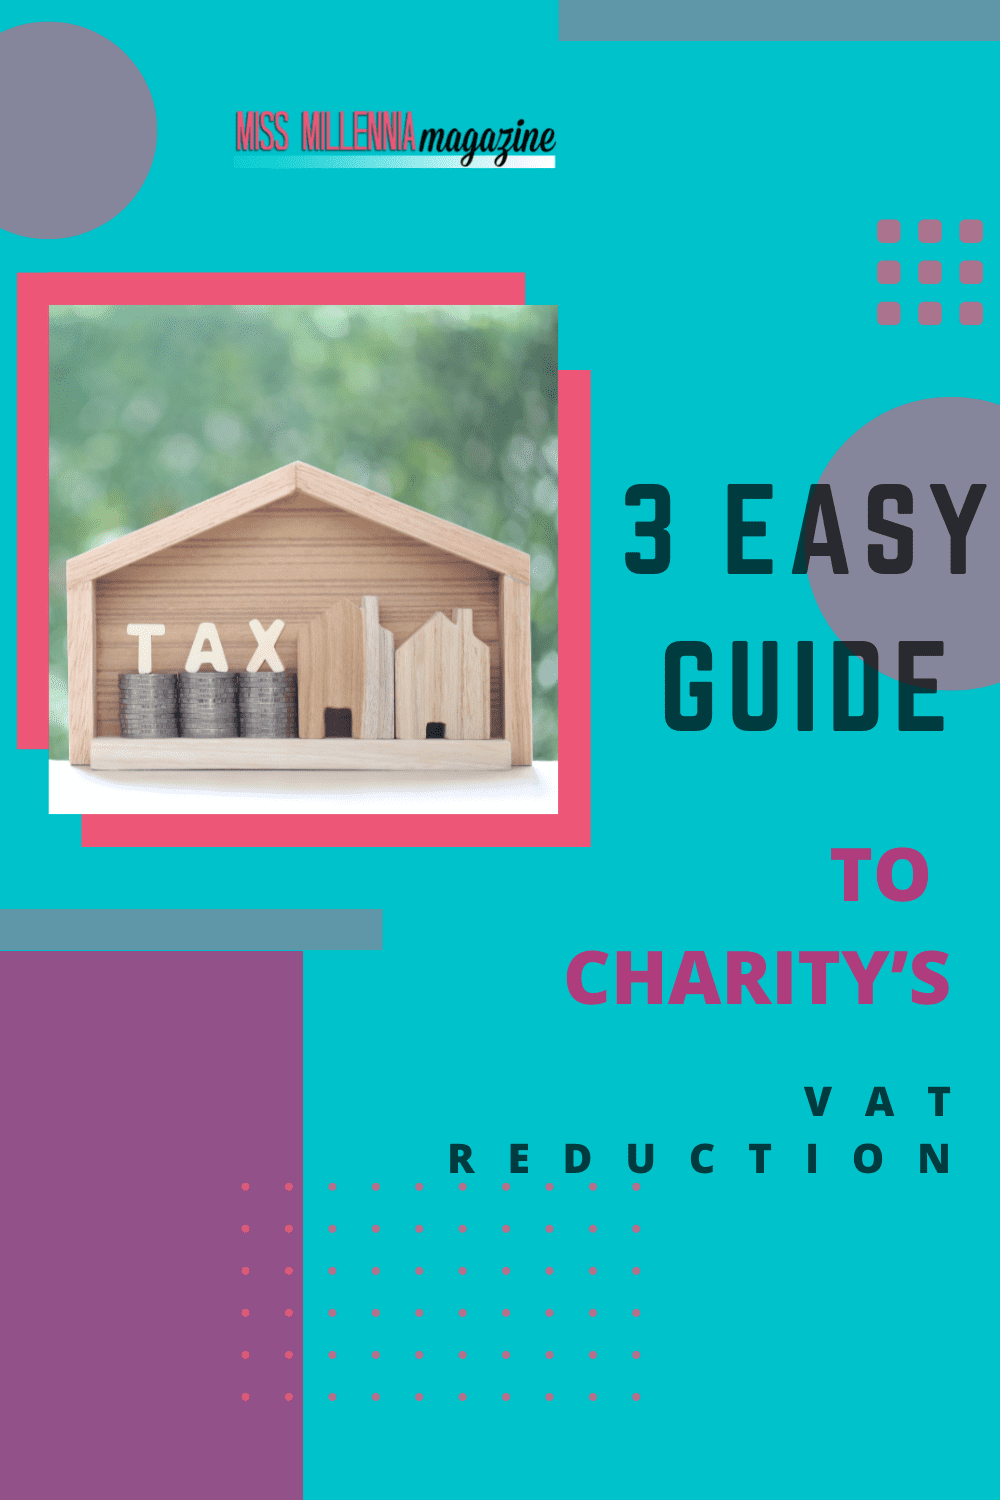 3 Easy Guide to Charity’s VAT Reduction